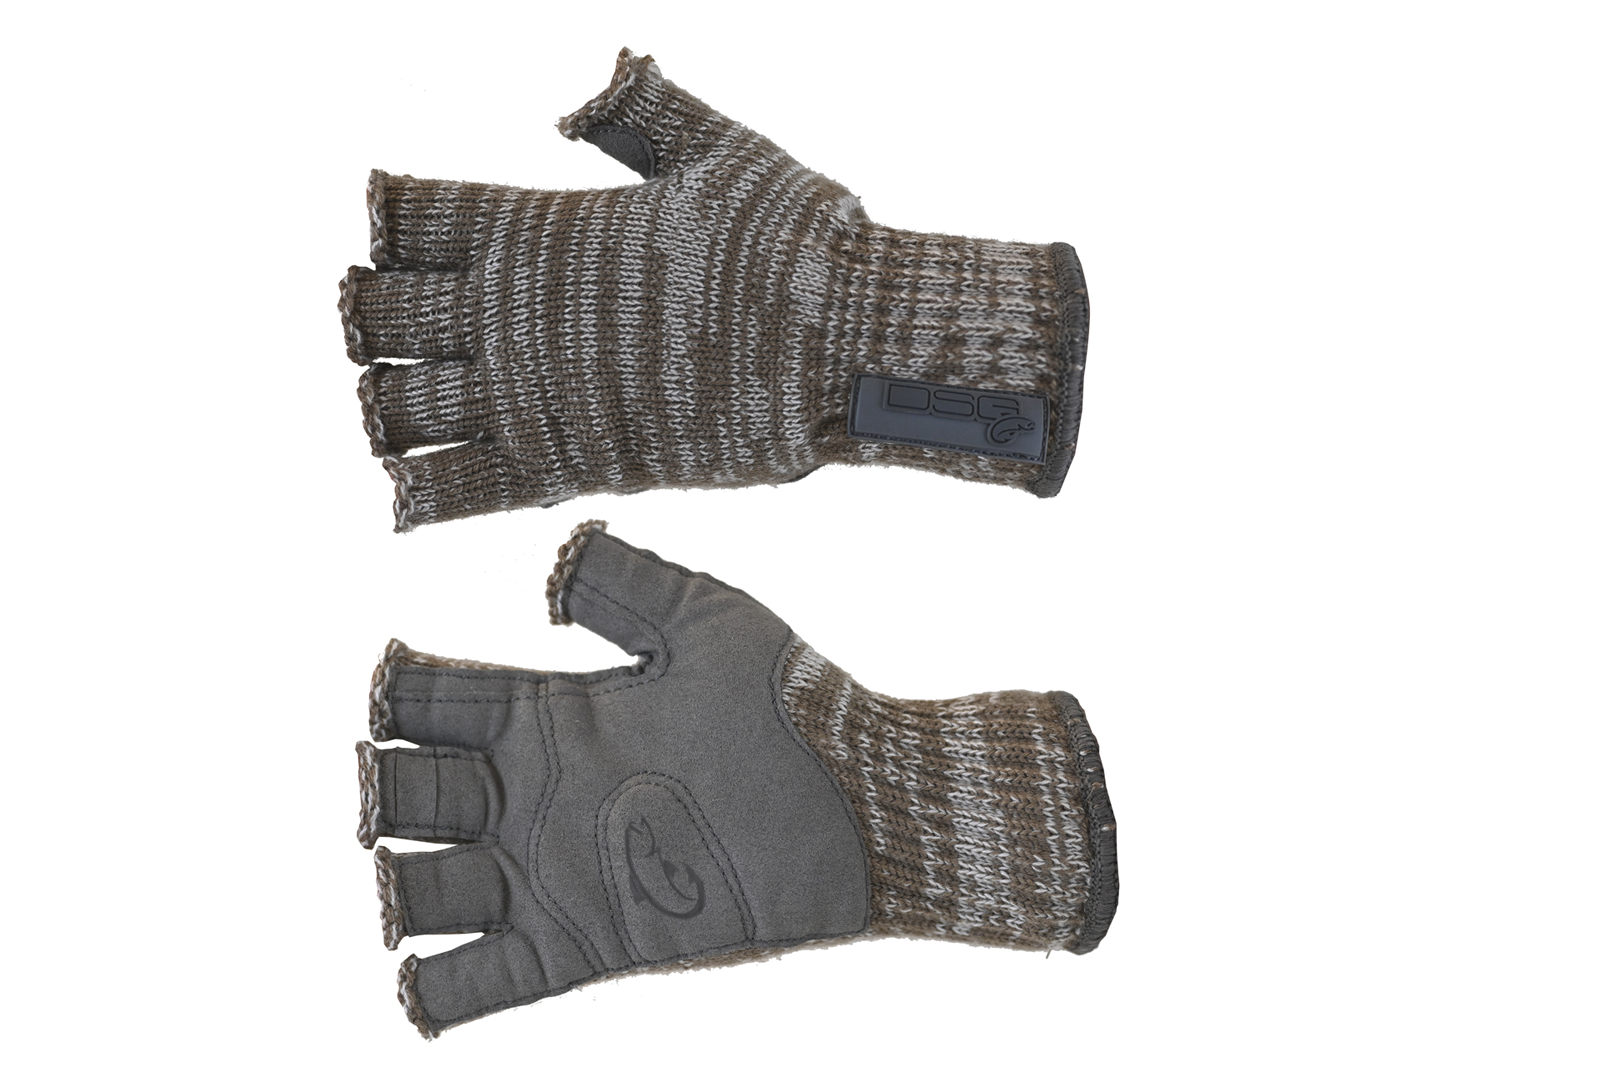 https://static.upnorthsports.com/Image/catimages/Wool-Fingerless-Gloves-Front-1600.png